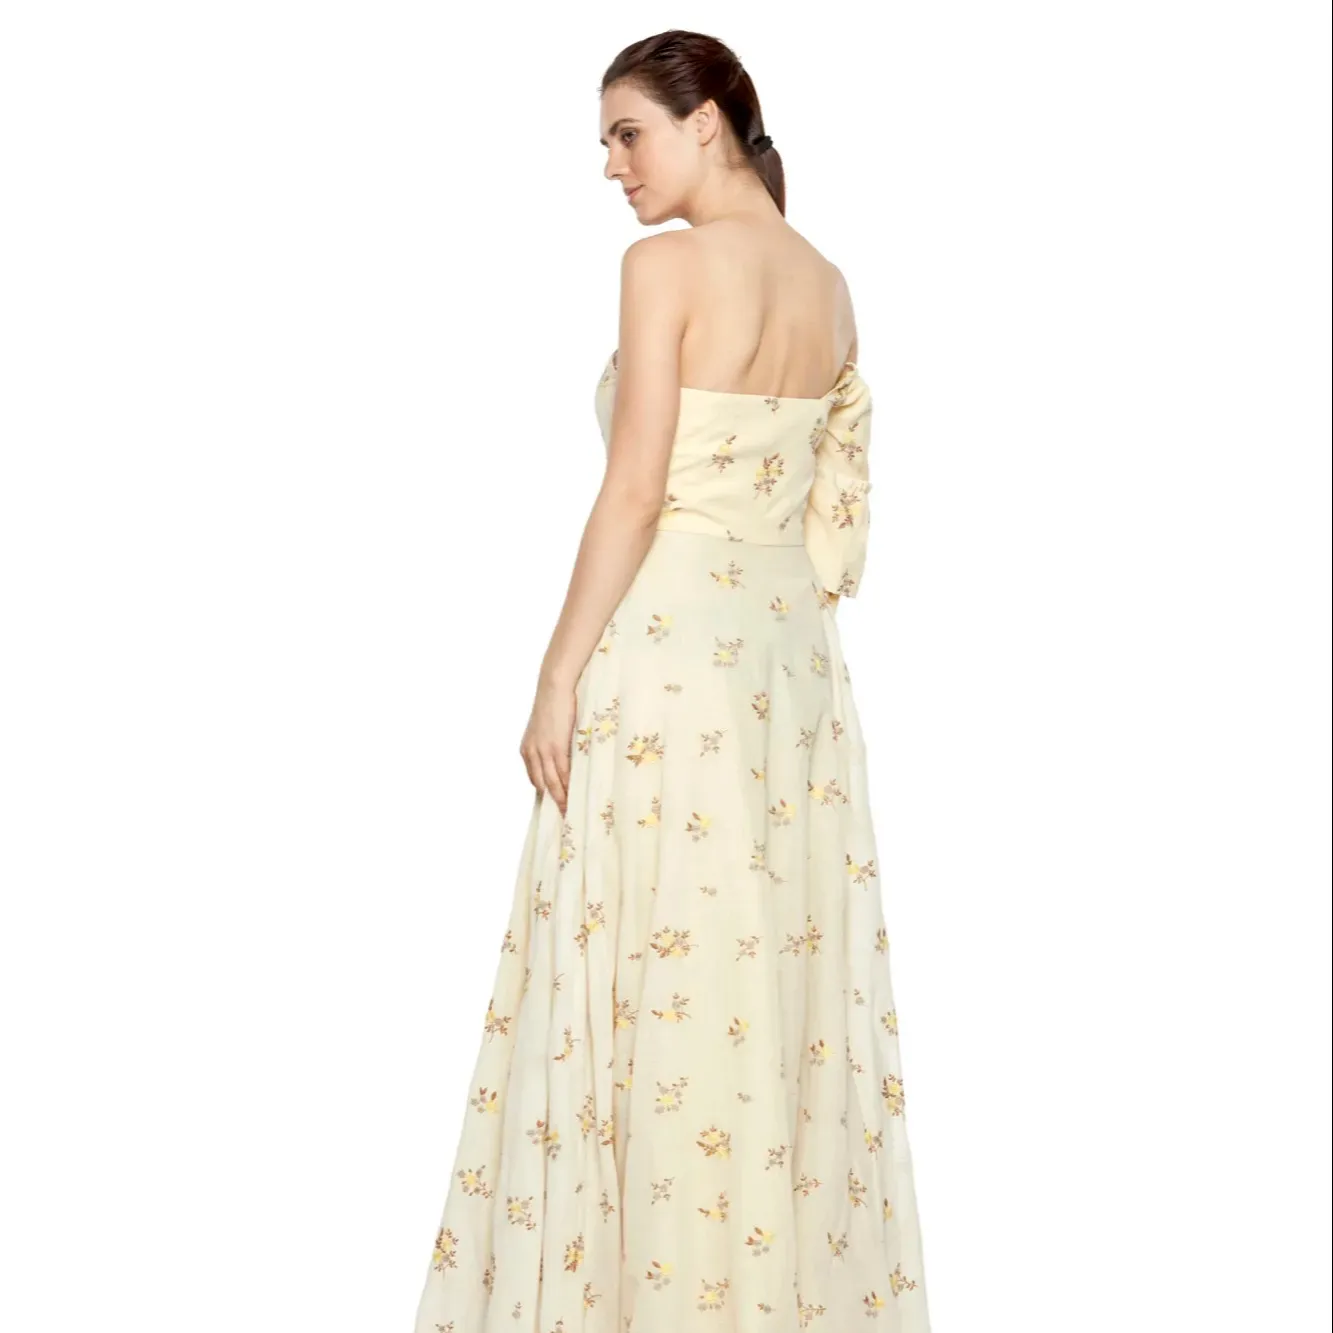 New Collection Best Quality Floral 1 Shoulder Maxi Dress At Affordable Price From Indian Manufacturer At Affordable Prices